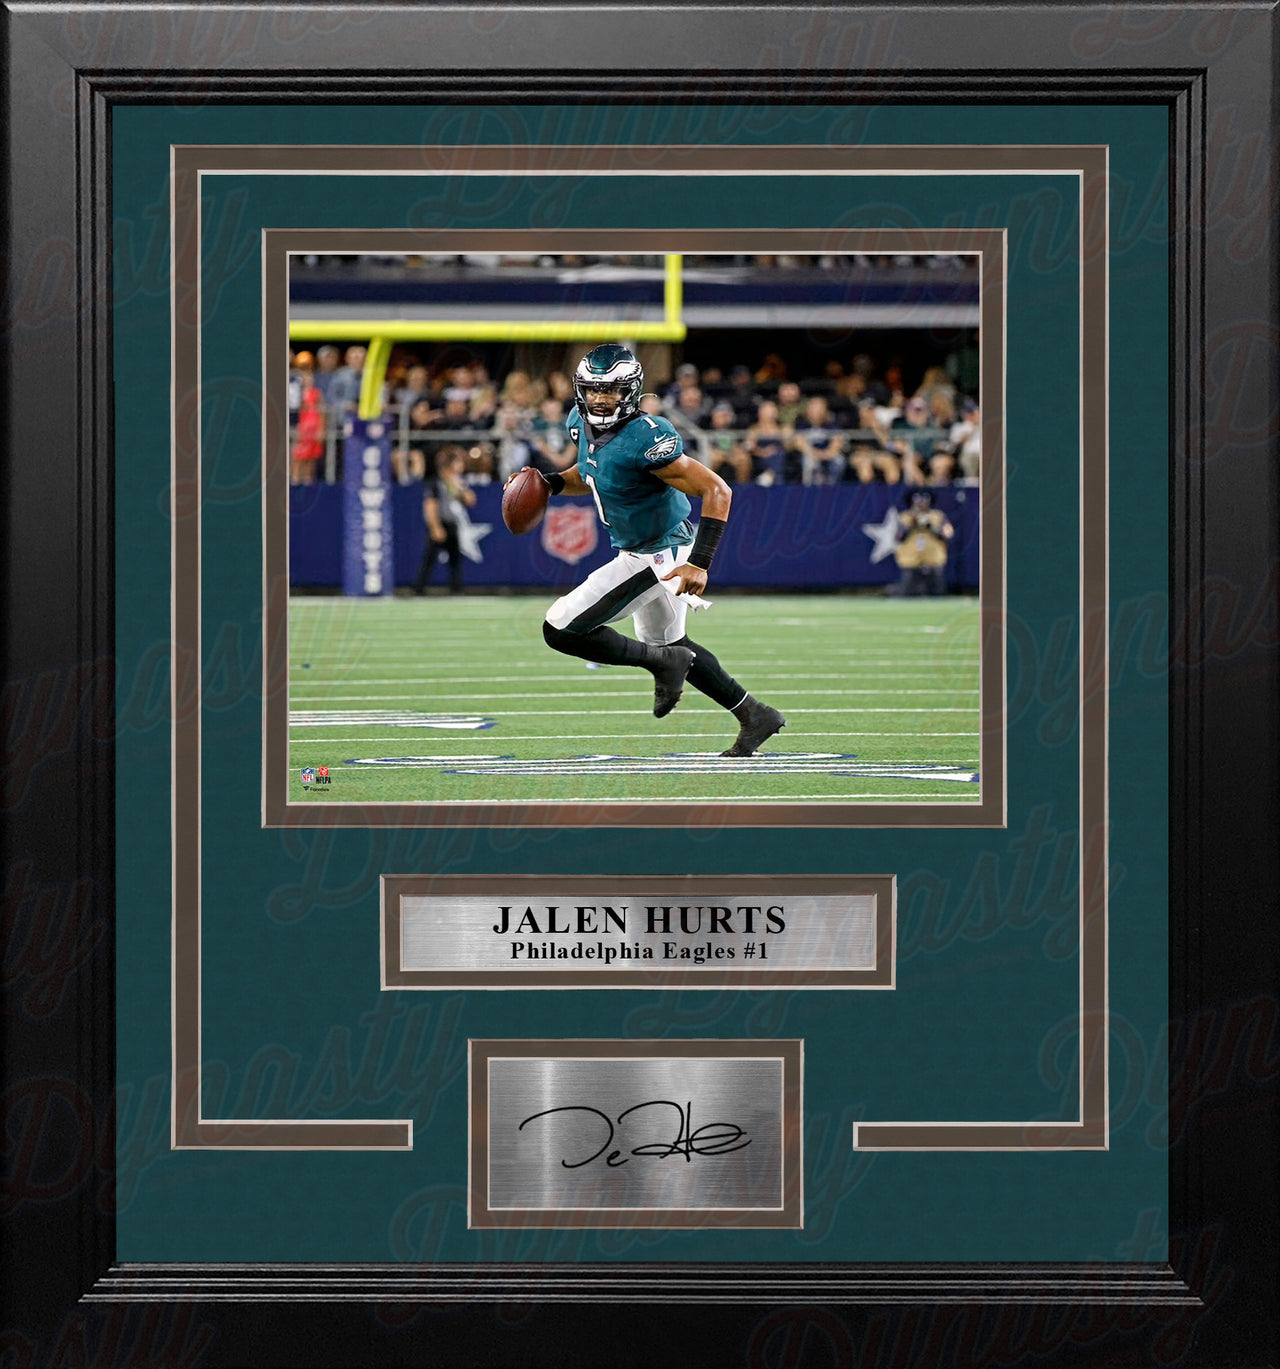 Jalen Hurts Running Action Philadelphia Eagles 8x10 Framed Football Photo with Engraved Autograph